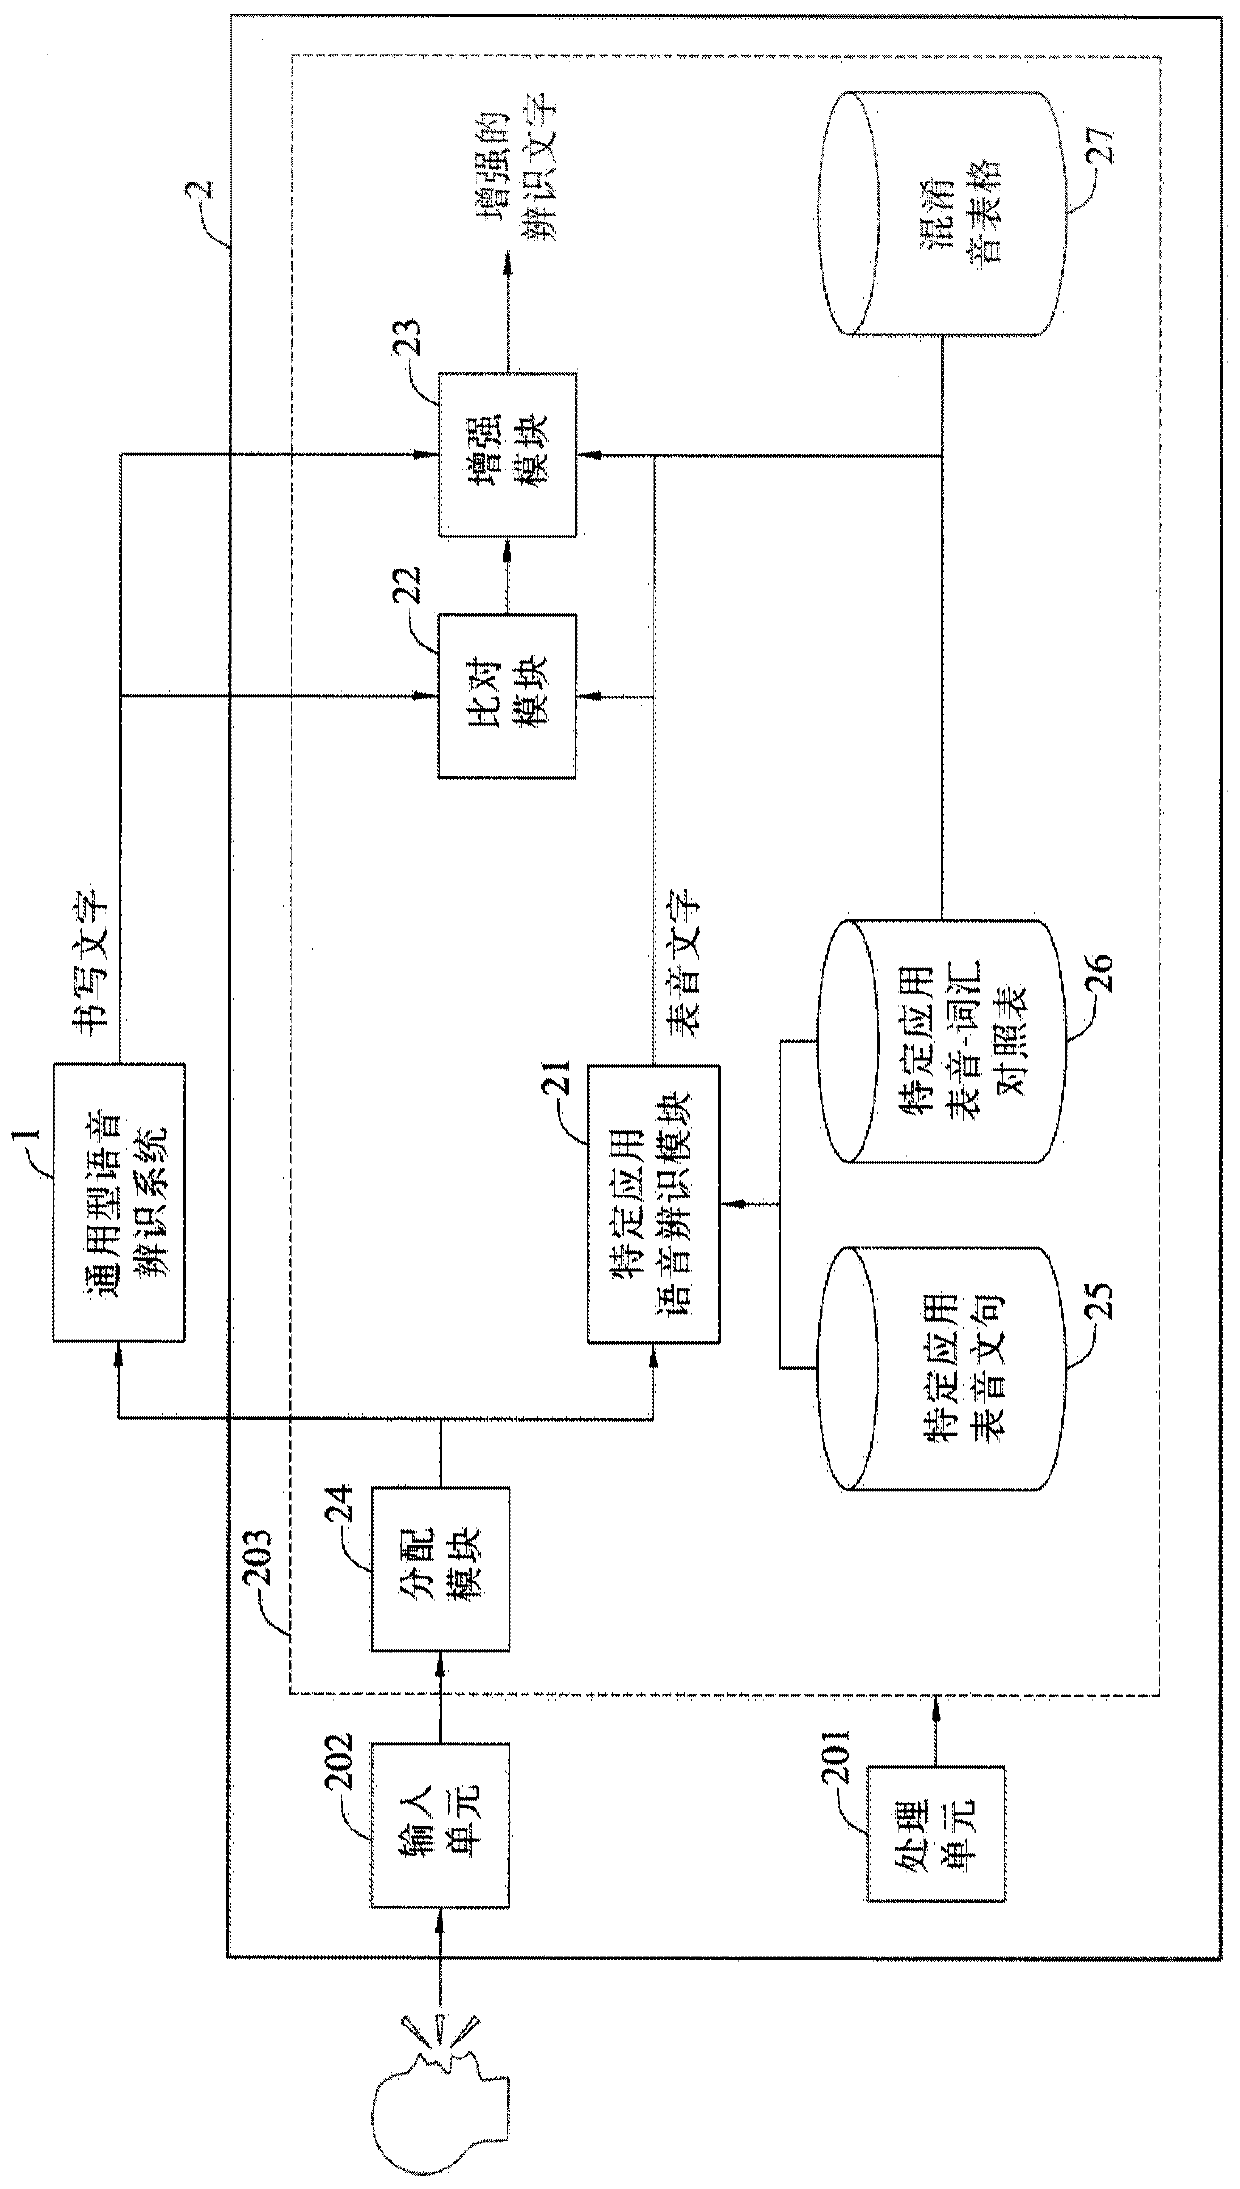 Speech recognition system, speech recognition method and computer program product